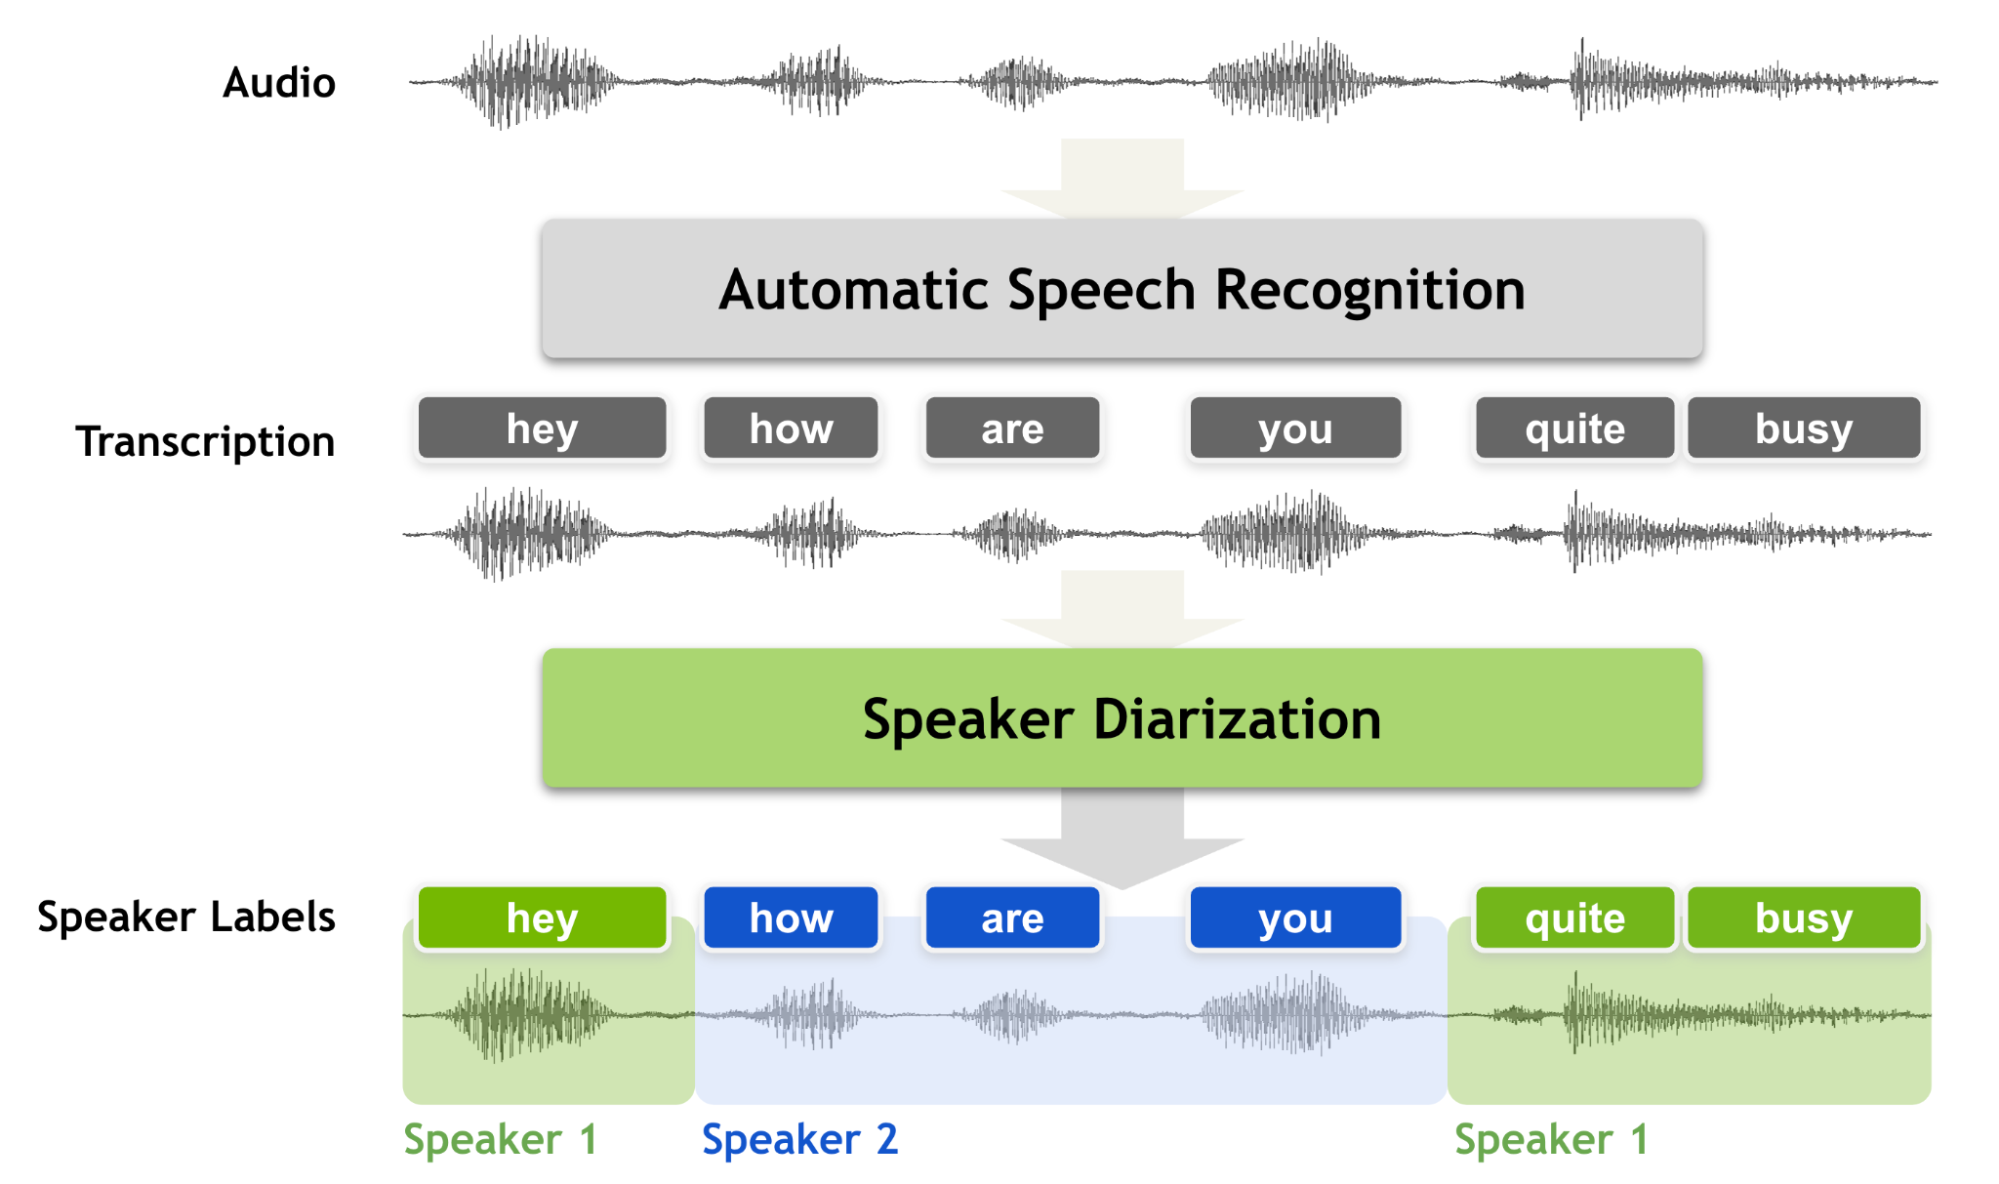 Diagram shows that a box named “Automatic Speech Recognition” produces transcribed words “hey how are you quite busy” but those words are all in the same gray color. After the speech signal waveform goes through a Speaker Diarization, “hey”,“quite”, “busy” are colored in green and “how”, “are”, “you” are colored in blue.